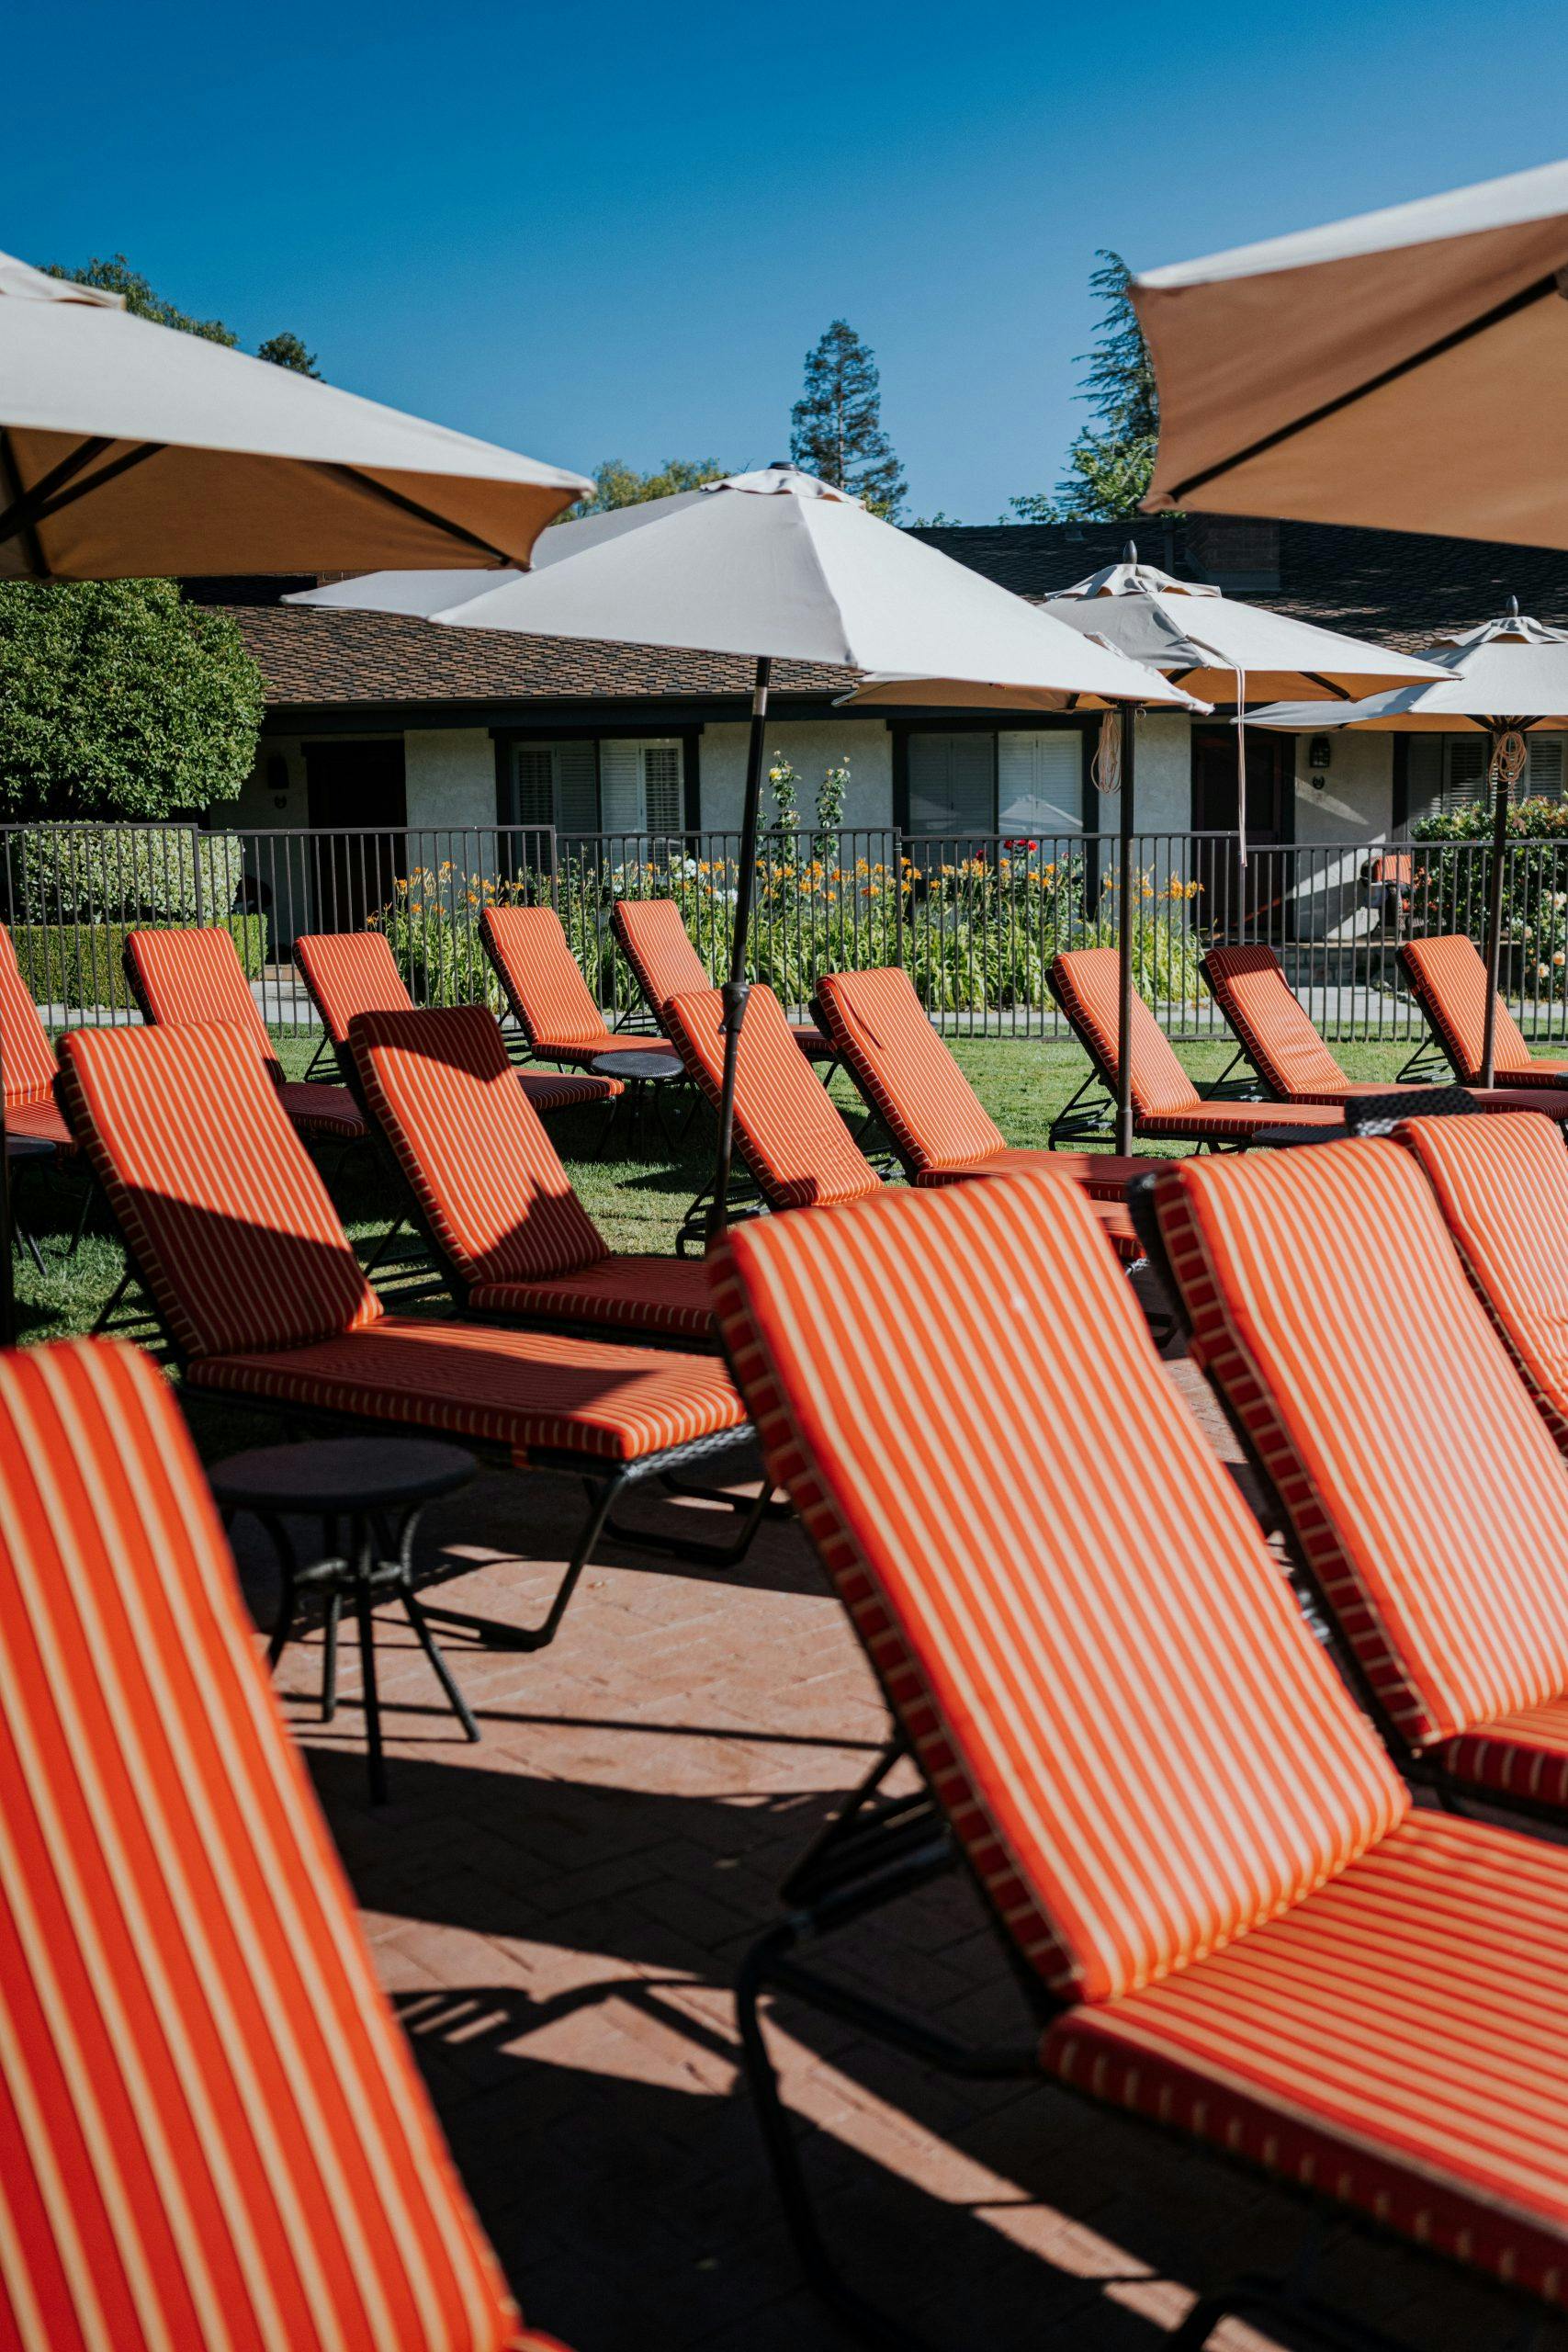 rows of lounge chairs with umbrellas